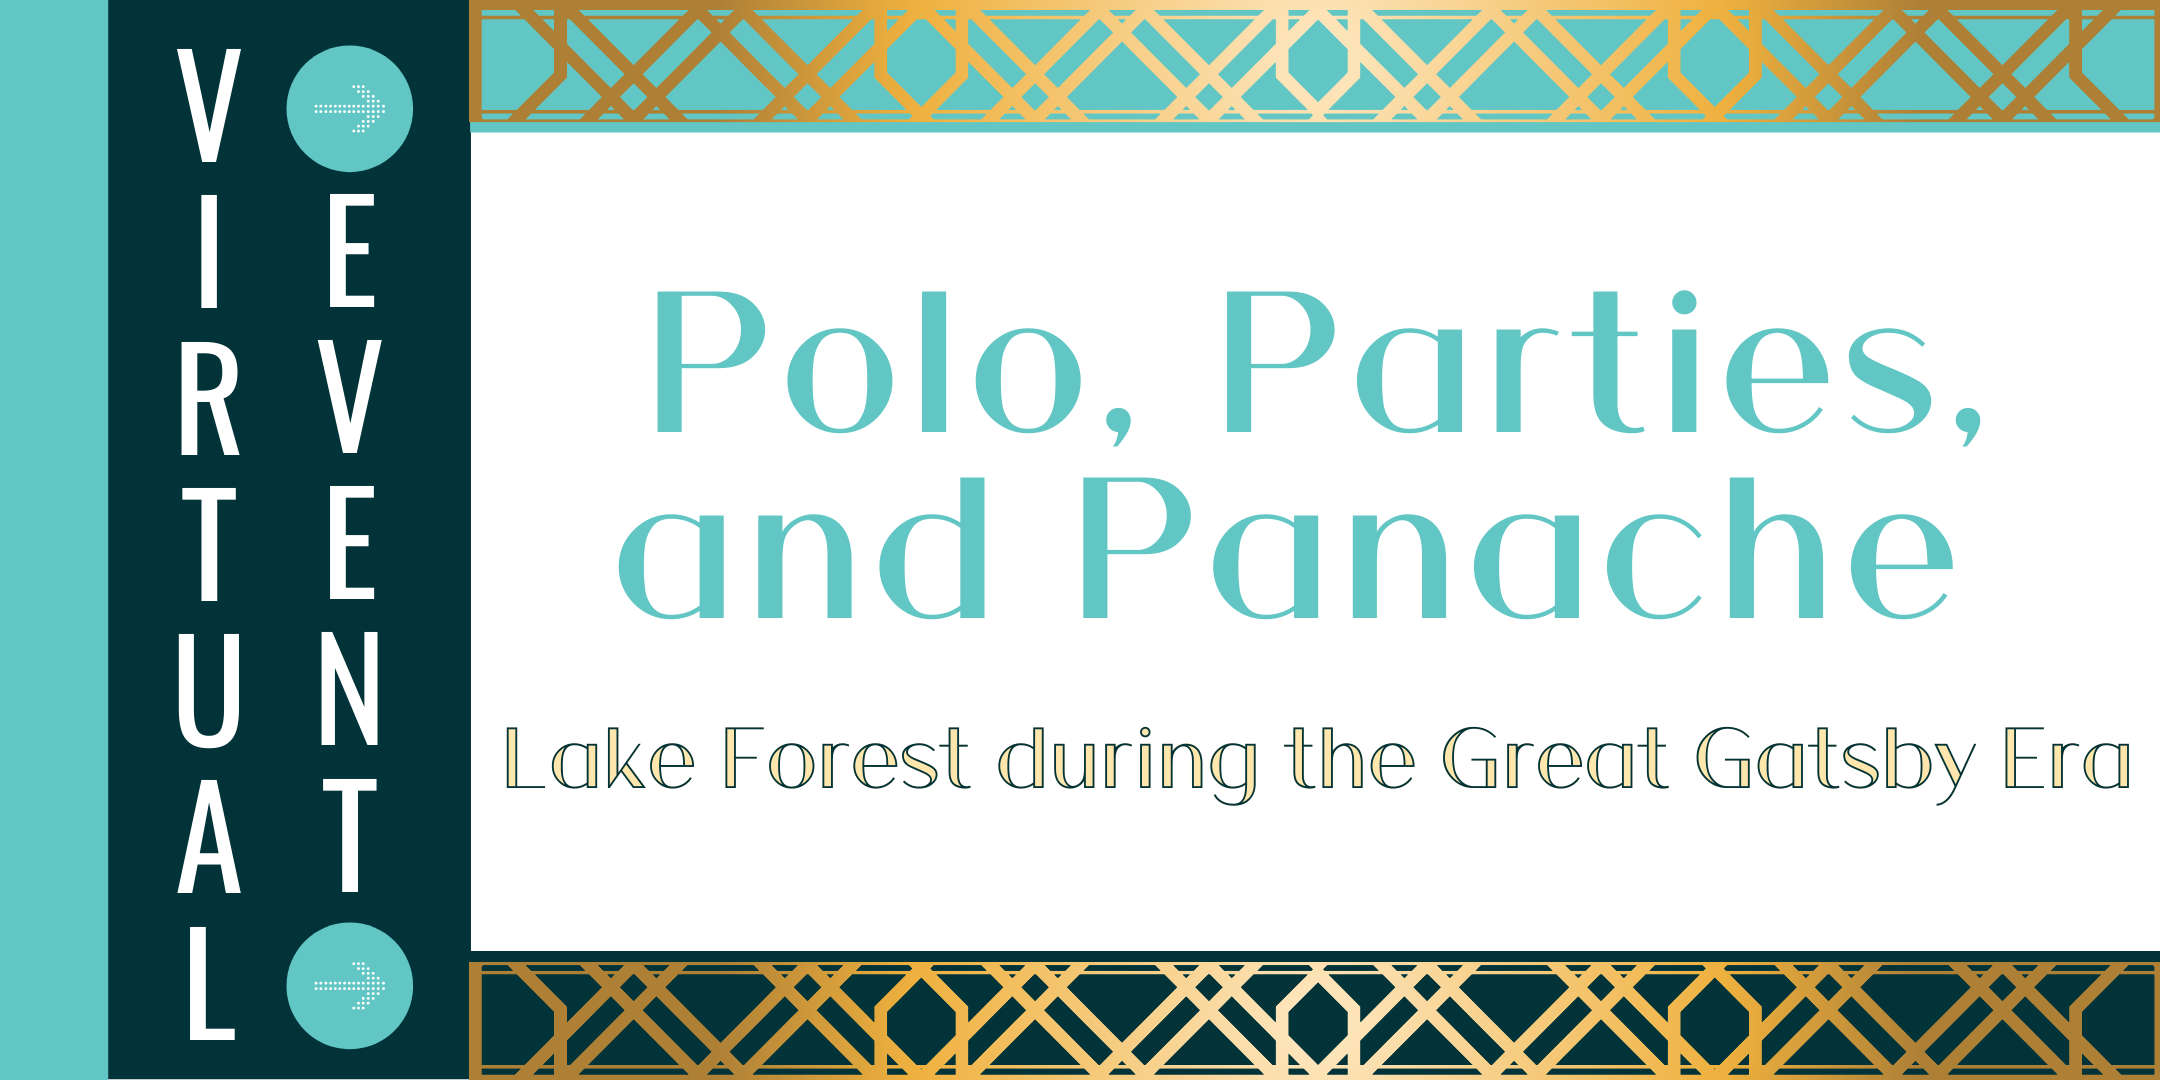 Polo, Parties, and Panache: Lake Forest during the Great Gatsby Era event image